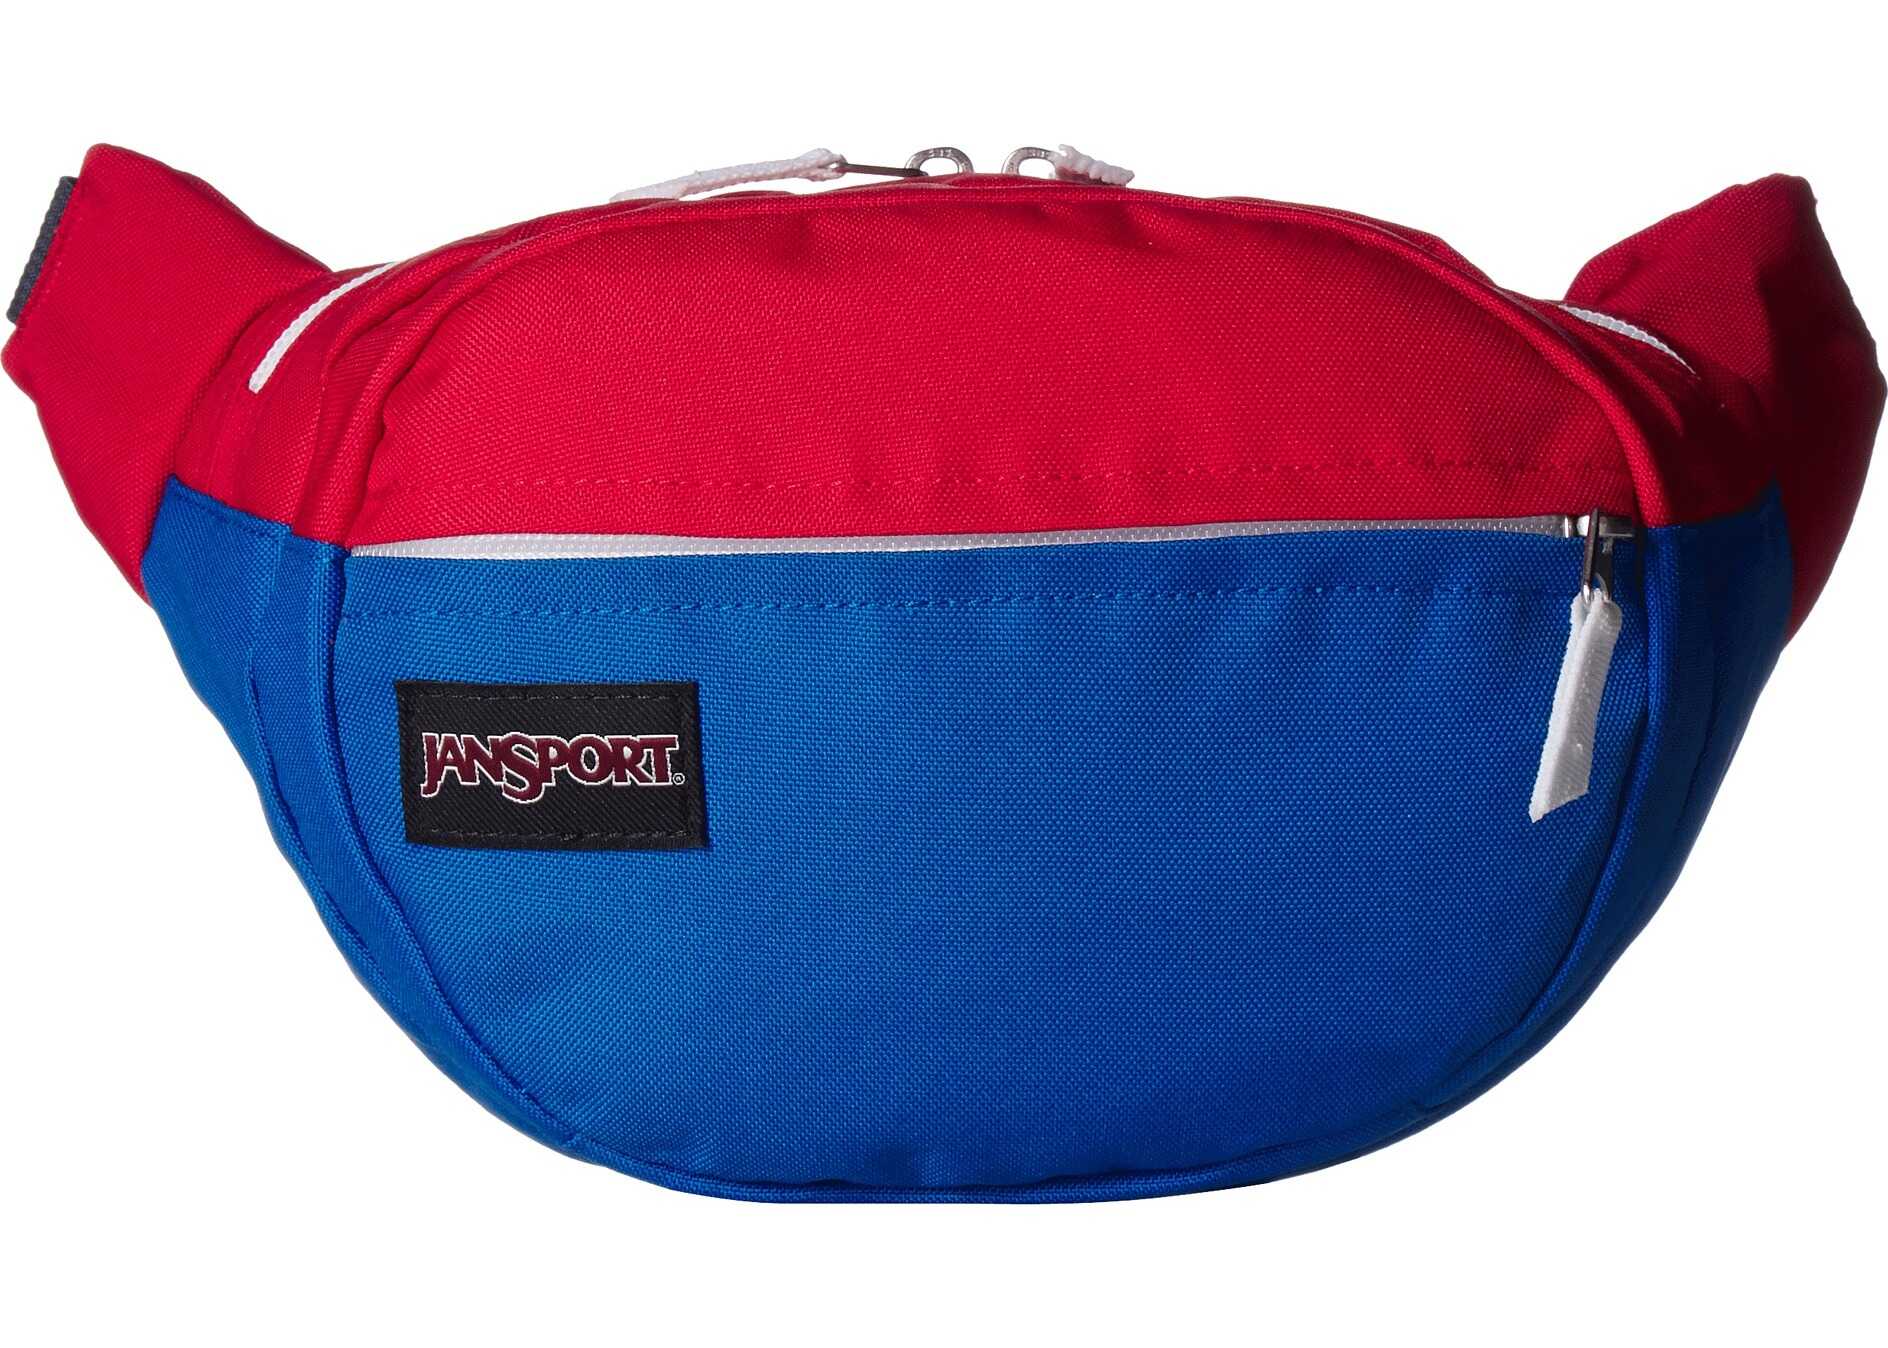 JanSport Fifth Avenue Red/White/Blue